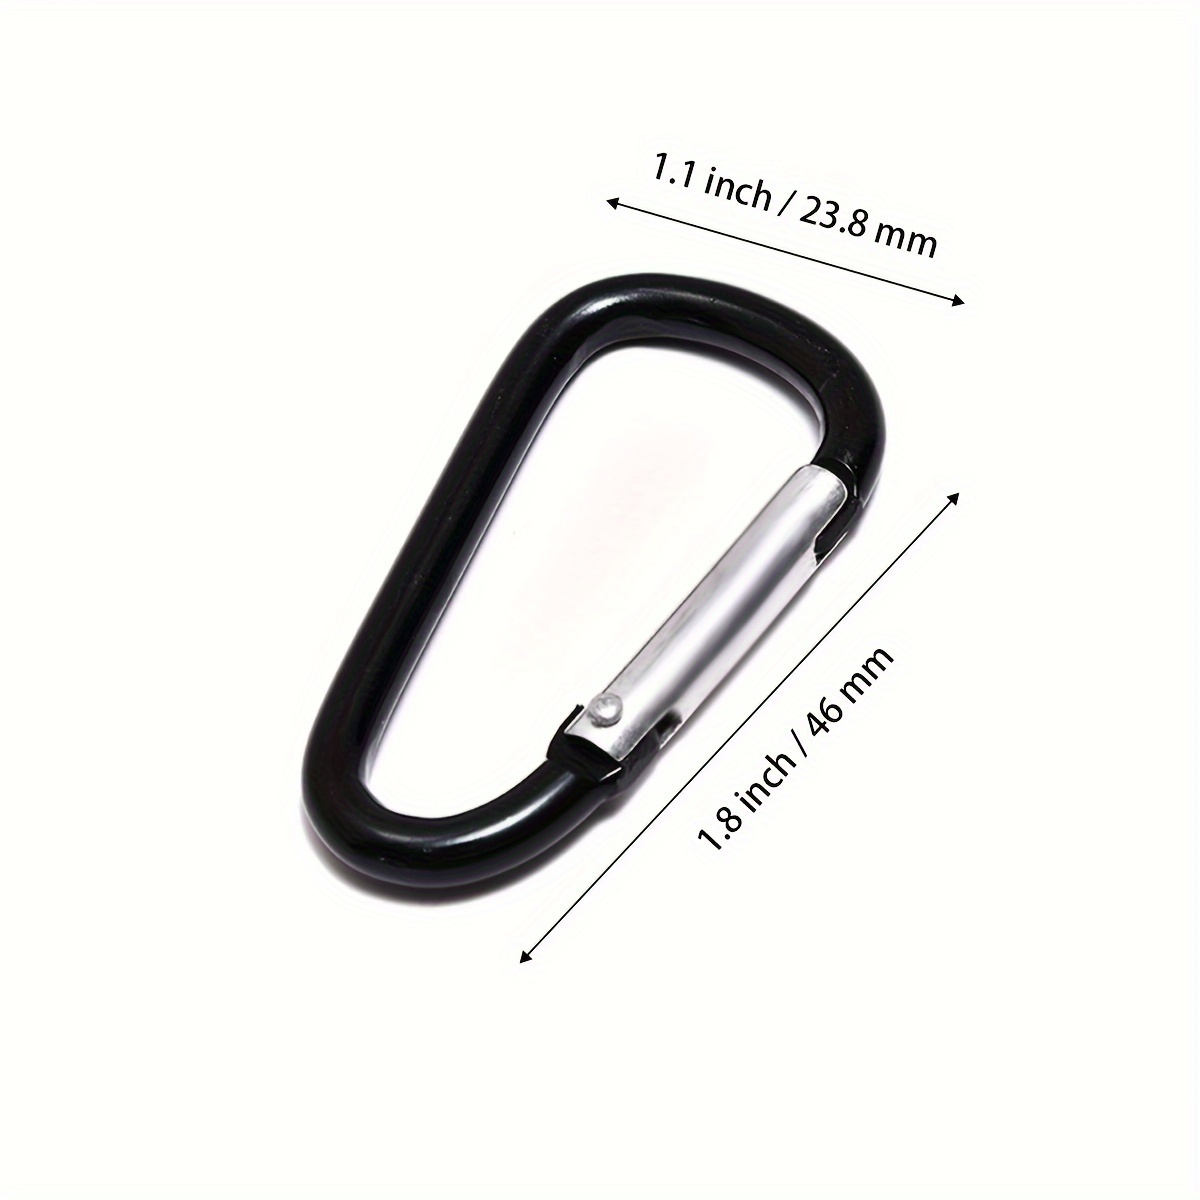 10pcs Aluminum Alloy Carabiner Keychain Keyring D Ring Spring Snap Hook Key  Chain Buckle For Outdoor Camping Hiking, High-quality & Affordable